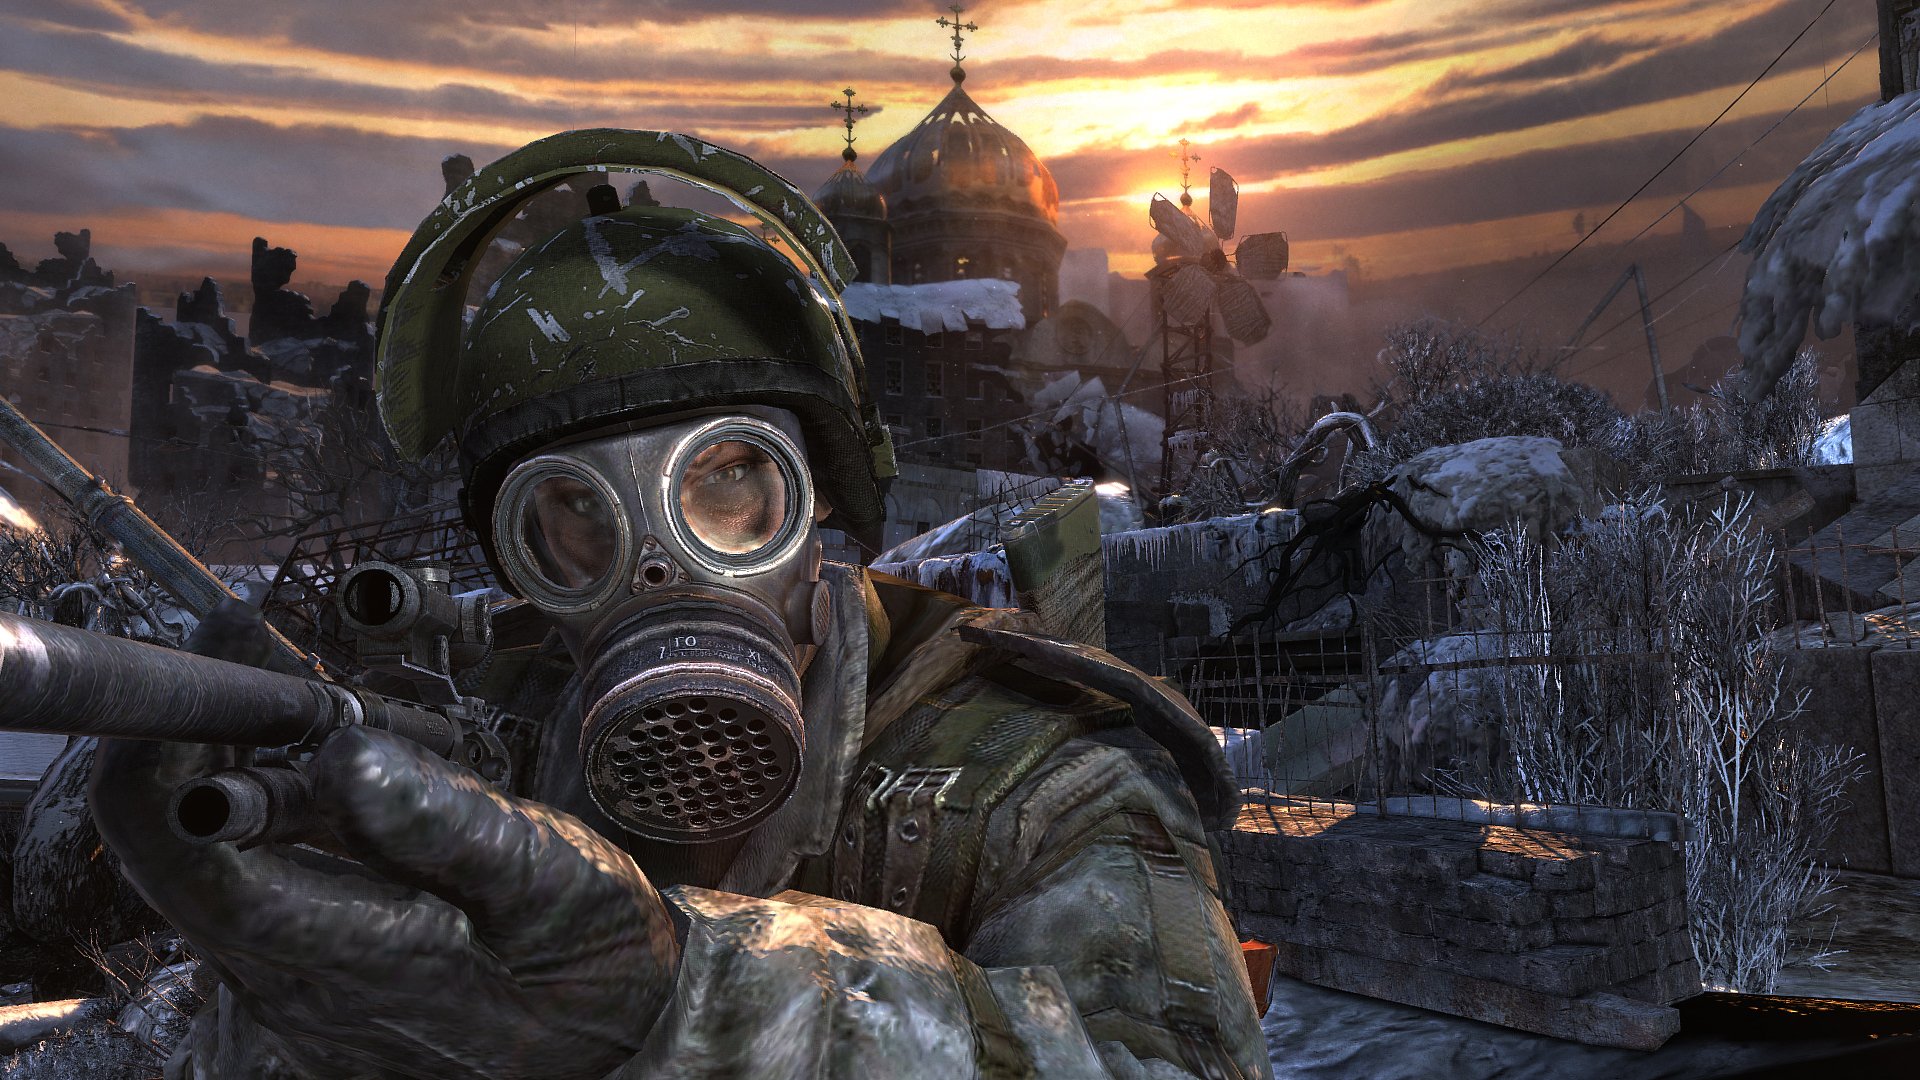 Metro 2033, Set in the shattered subway of a post apocalypt…